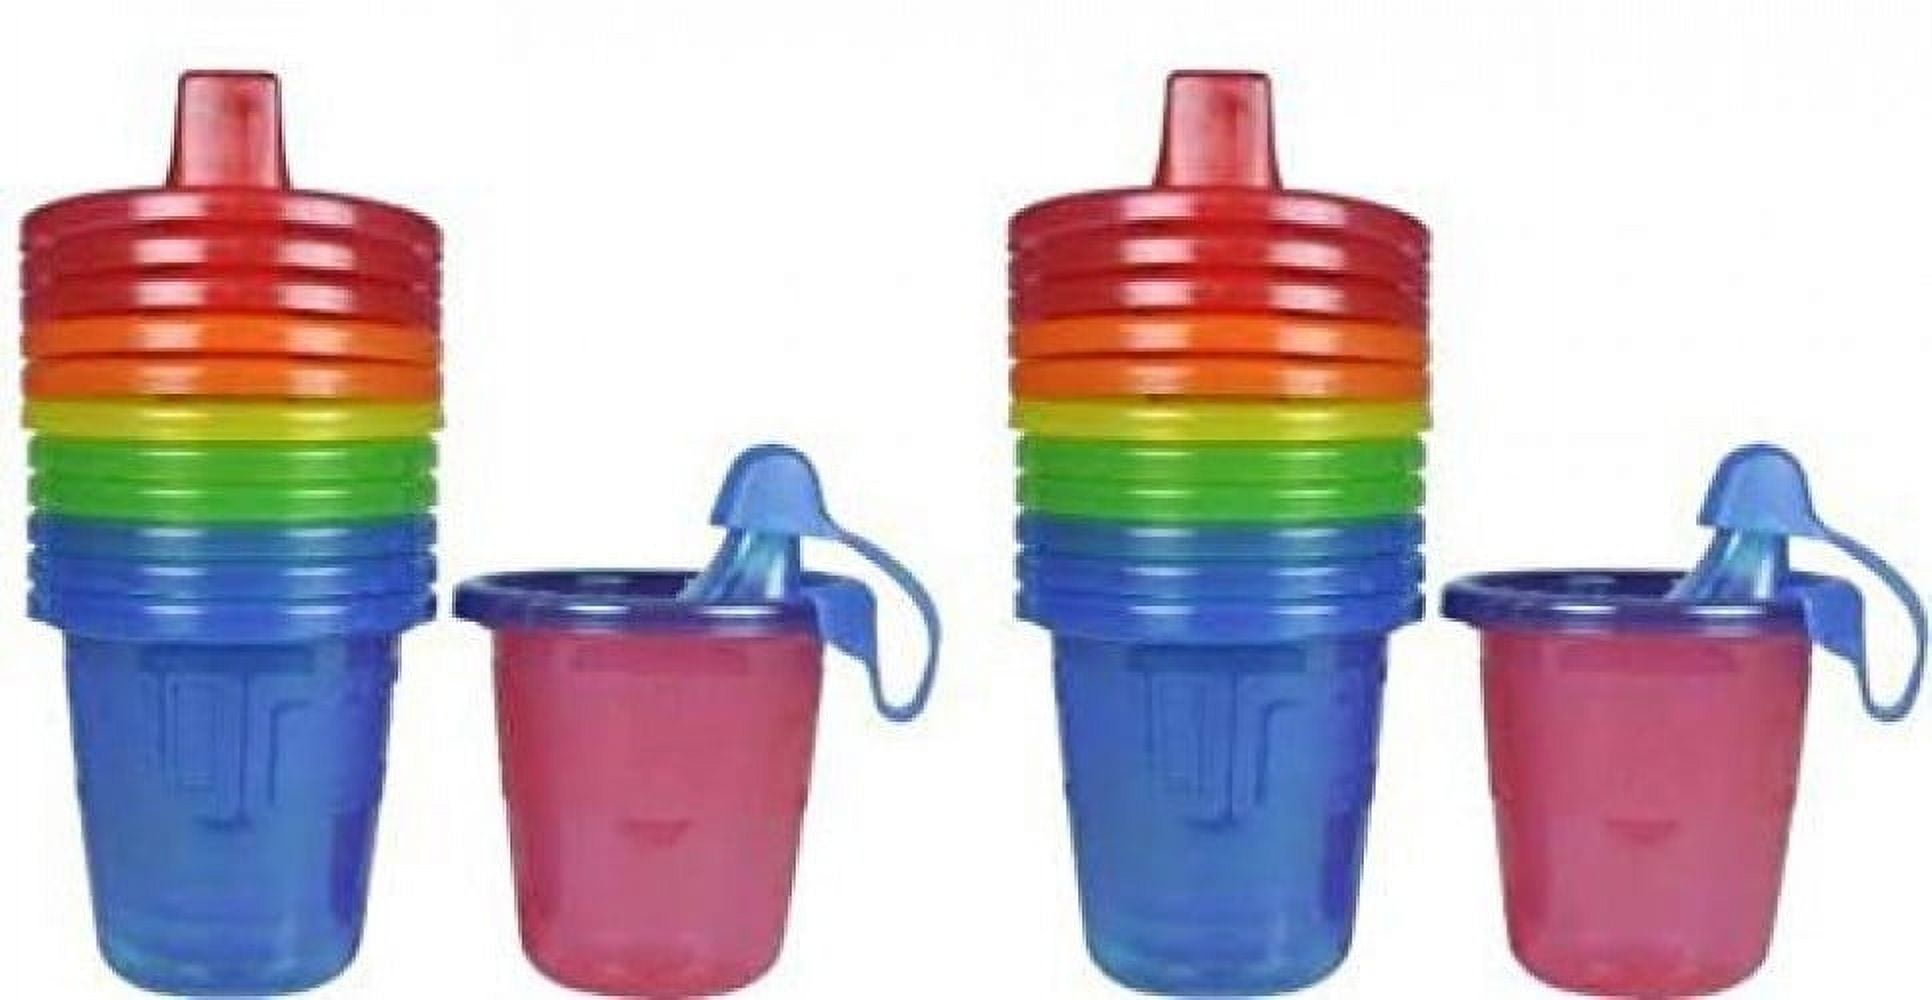 Stage 1 Spill Proof Sippy Cup, Portable and Versatile Weening Cup, Toddler  Cup, Gender Neutral Kids and Baby Tableware 